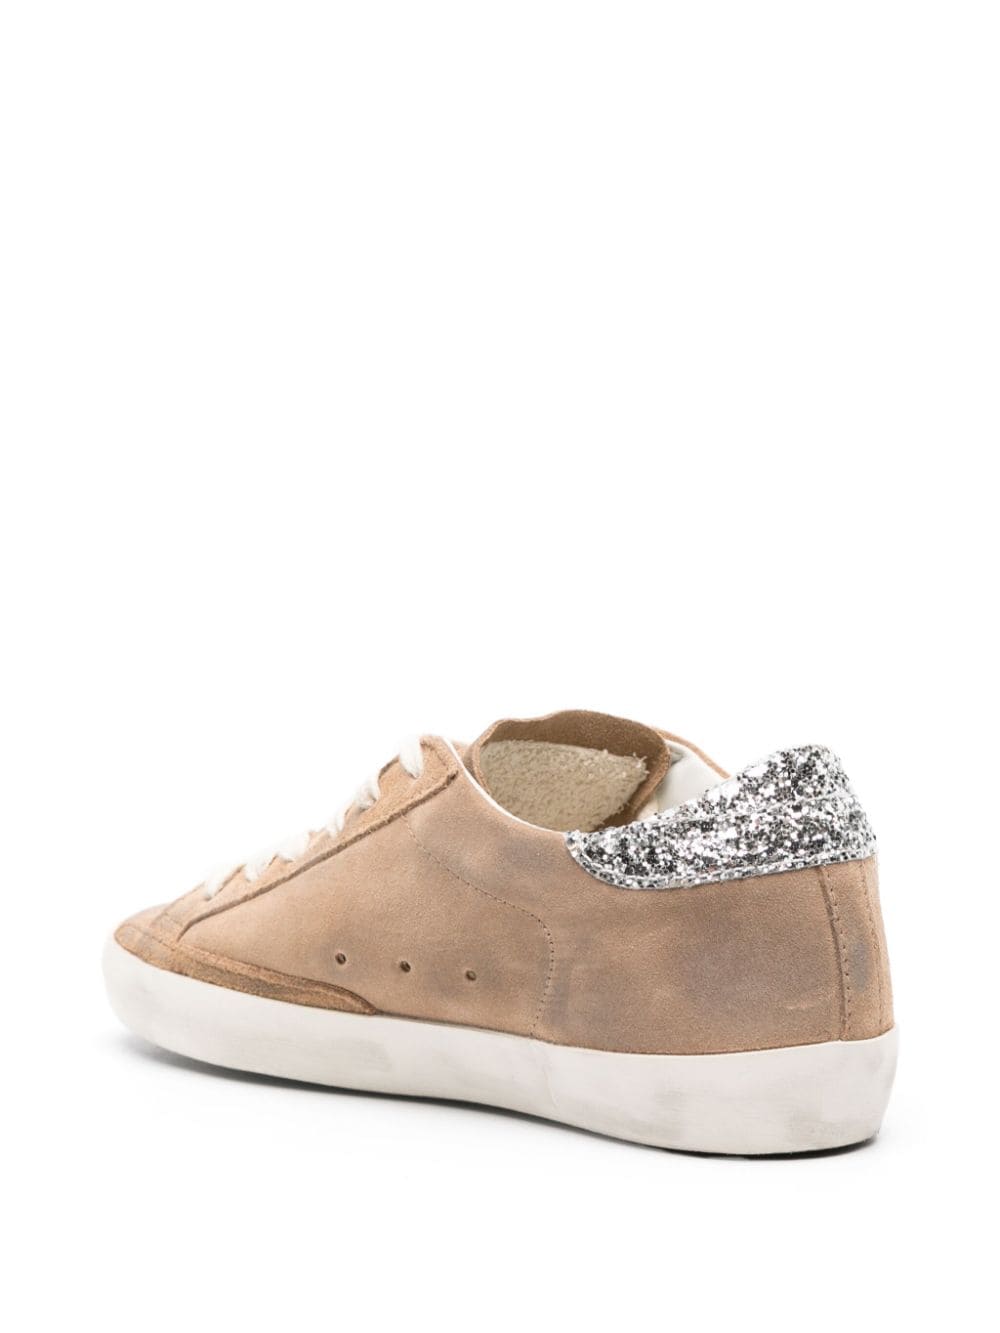 Original：Tabacco/Silver Super Star Suede Glitter Sneakers for Women SS24